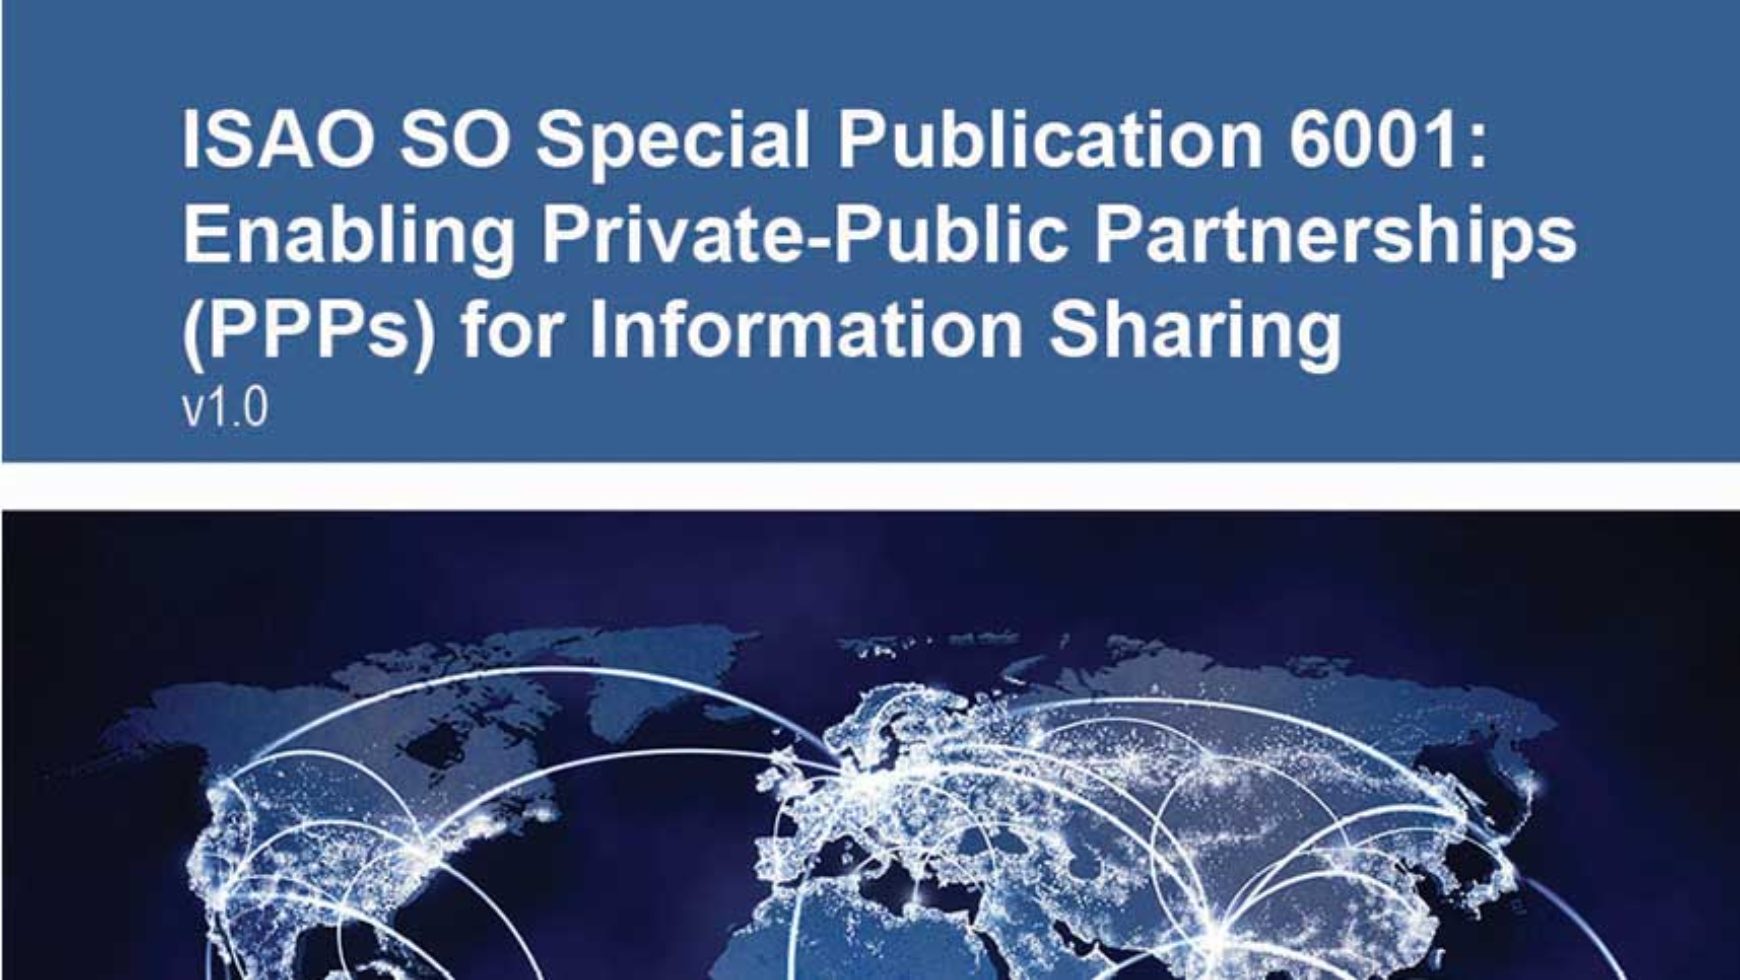 ISAO SP 6001: Enabling Private-Public Partnerships for Information Sharing